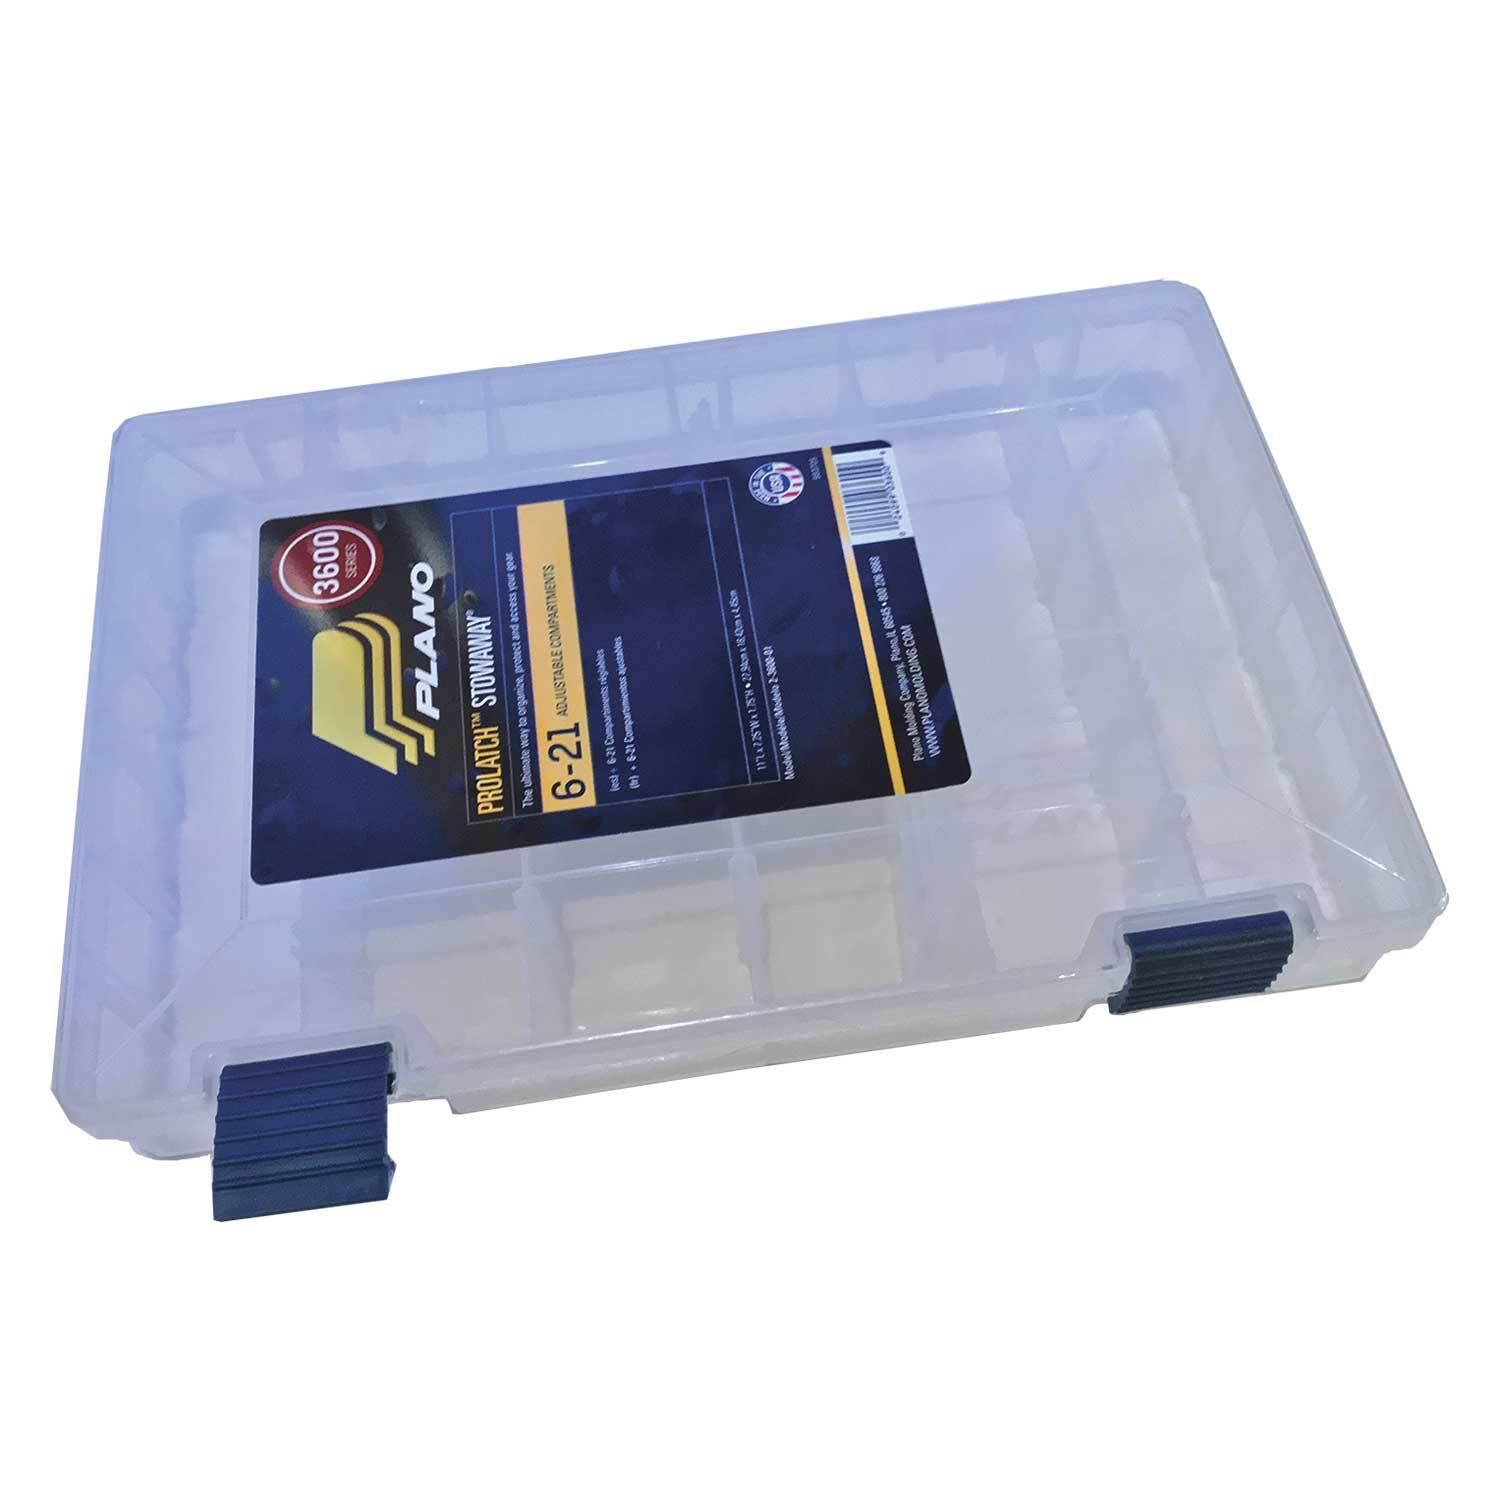 Pro 3600 Clear Box Plano | Waters Catalog